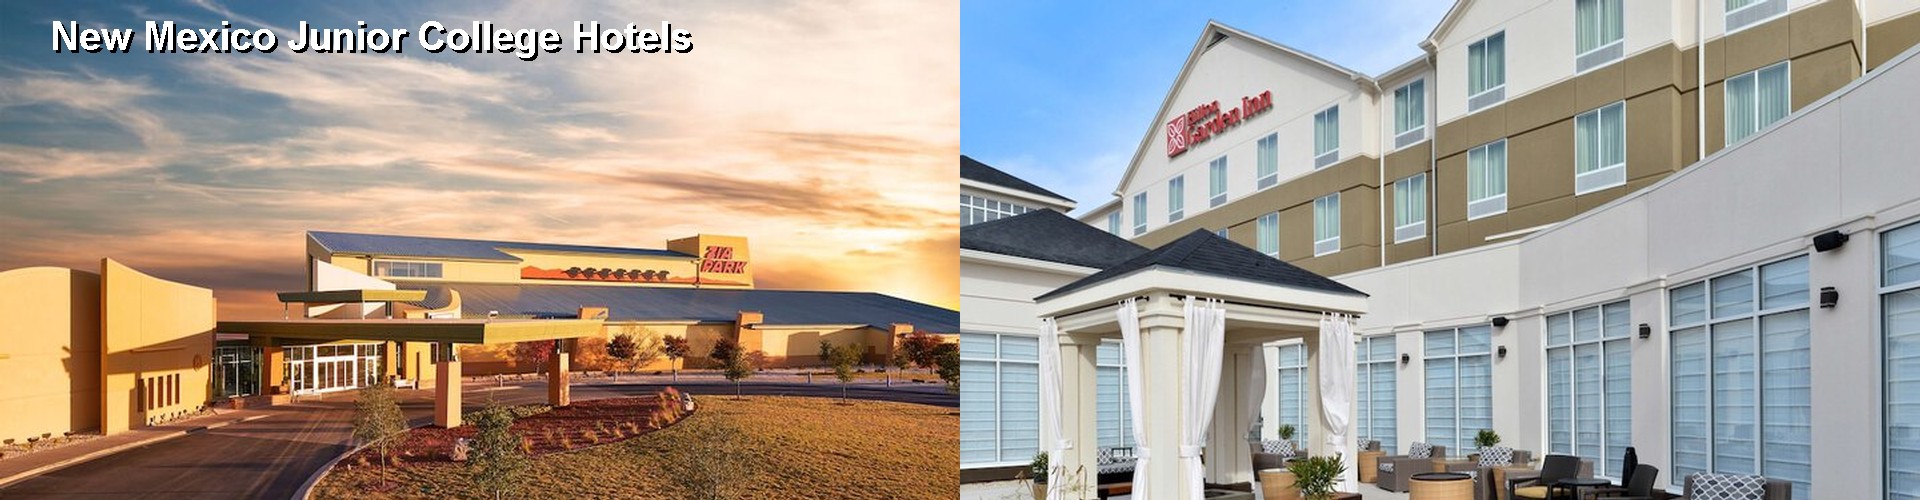 5 Best Hotels near New Mexico Junior College